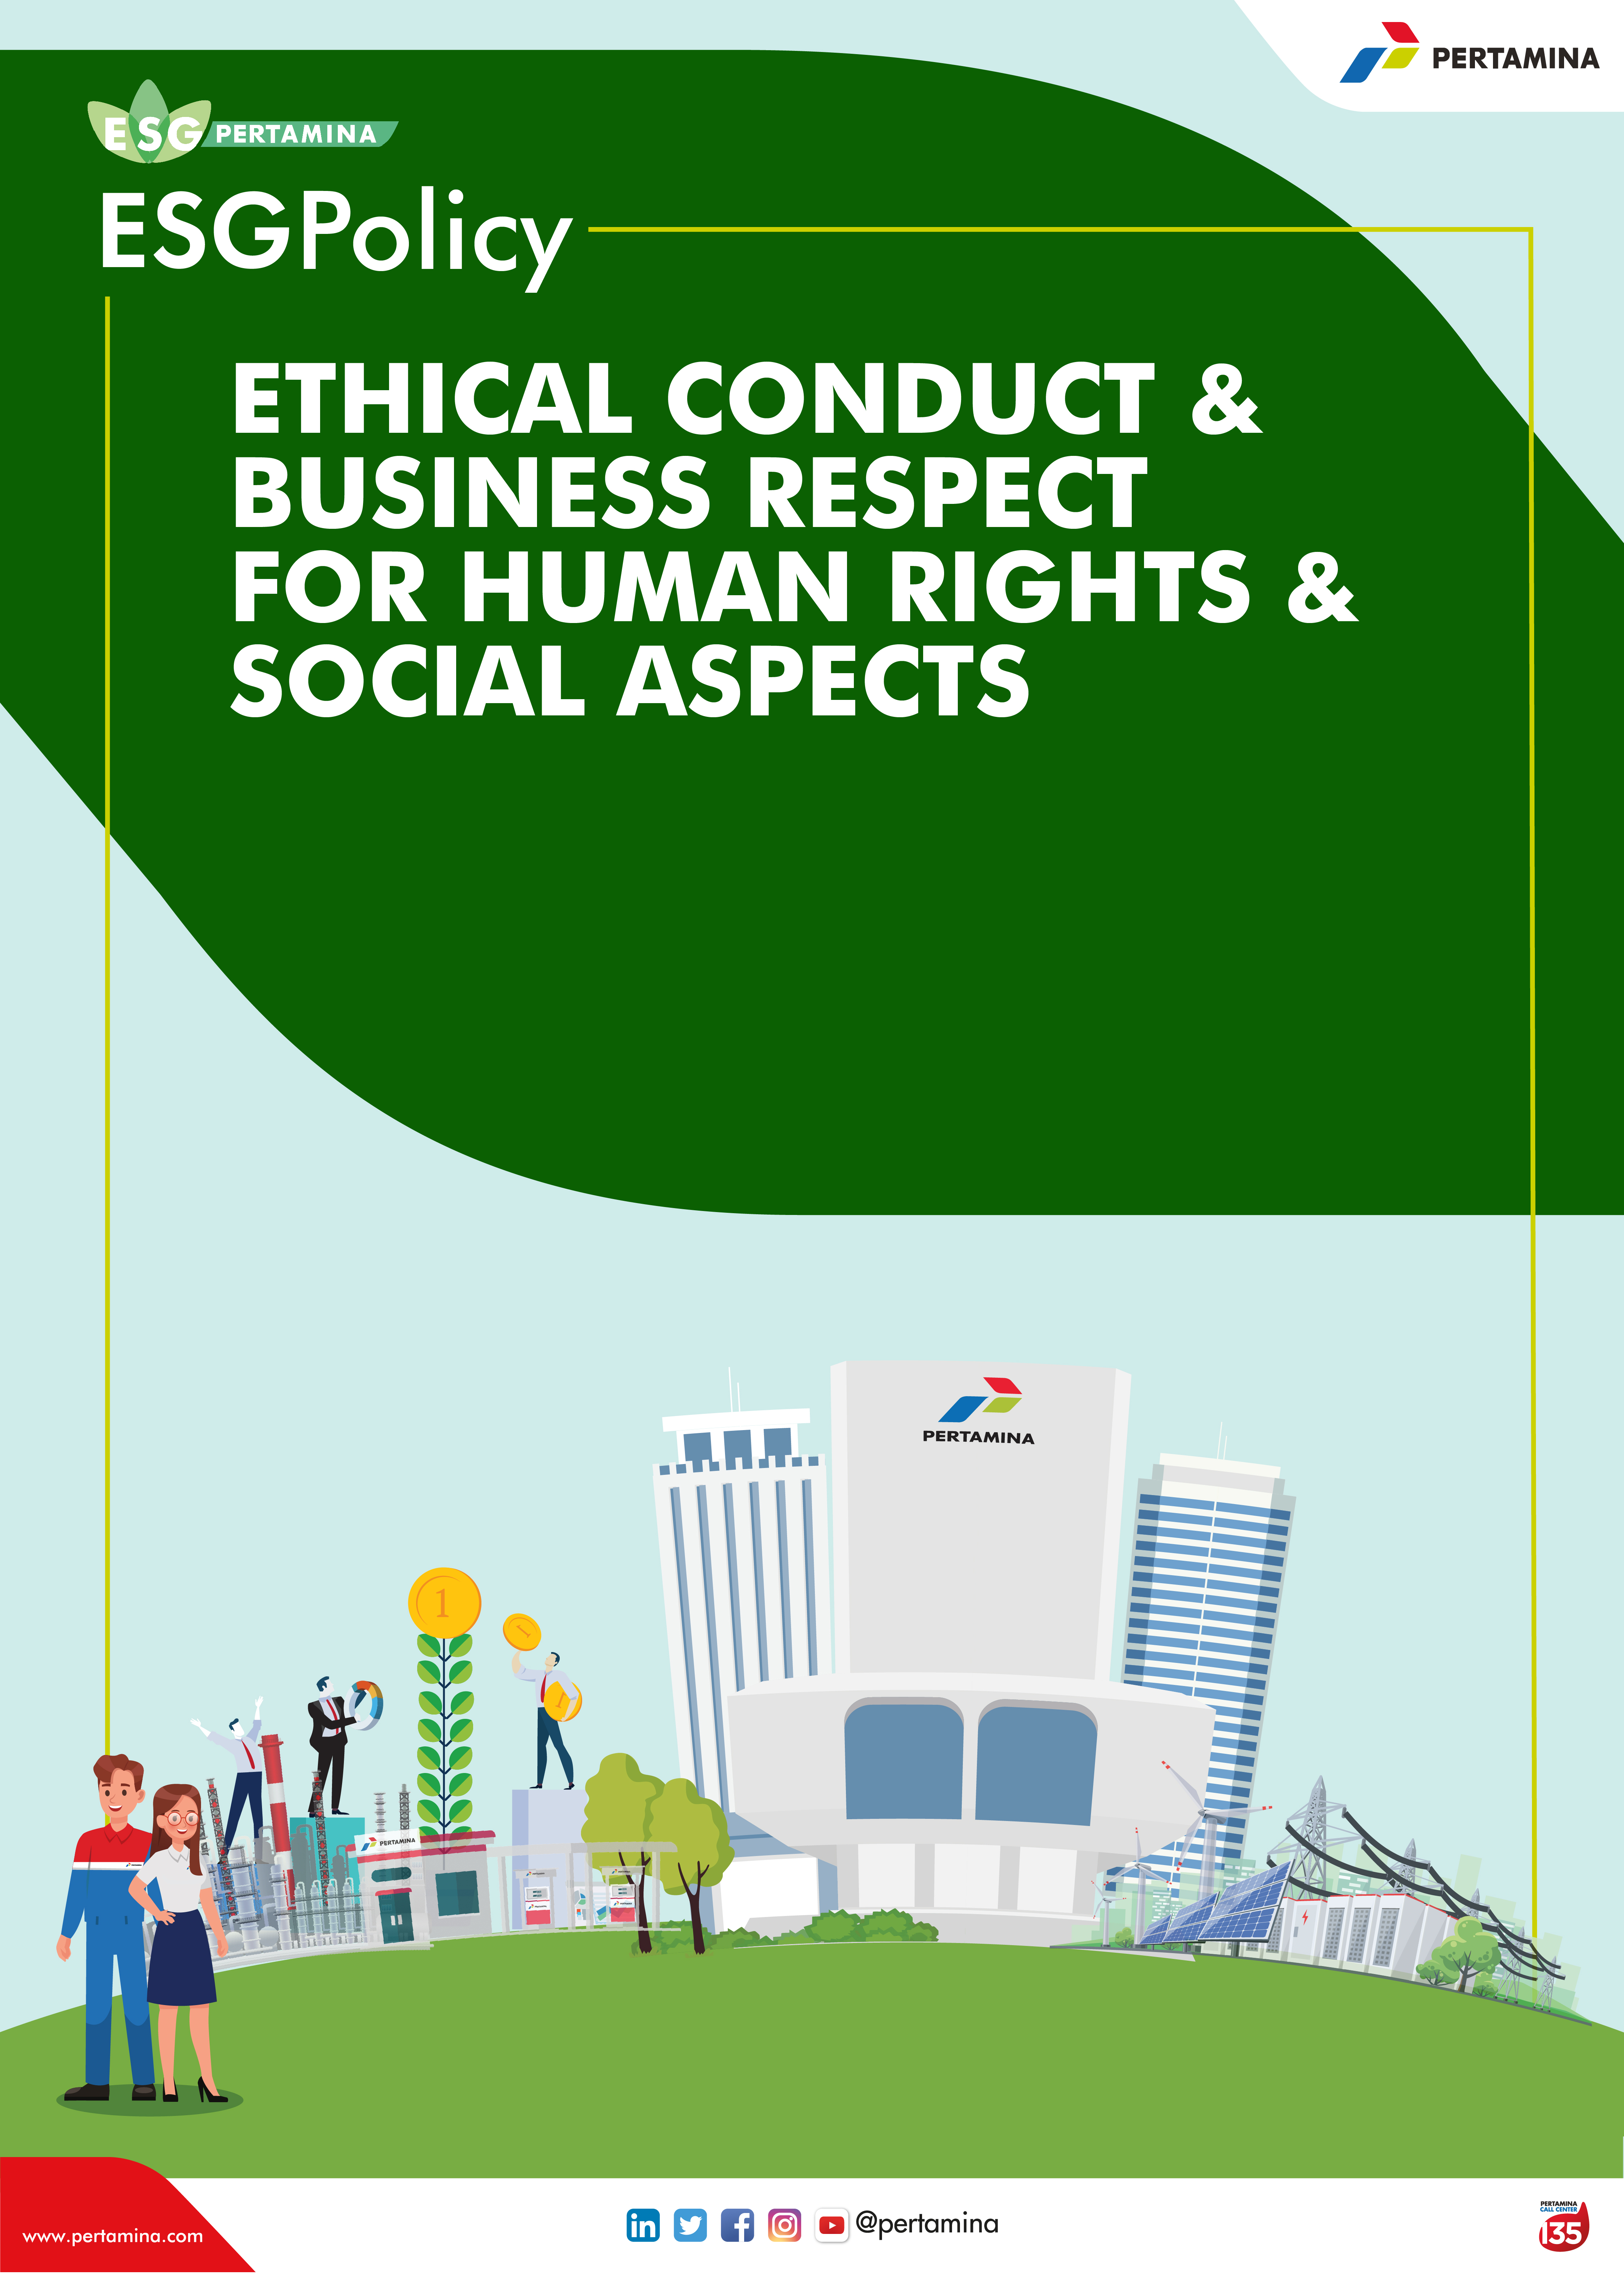 Ethic Conduct & Business Respect for Human Rights and Social Aspects 